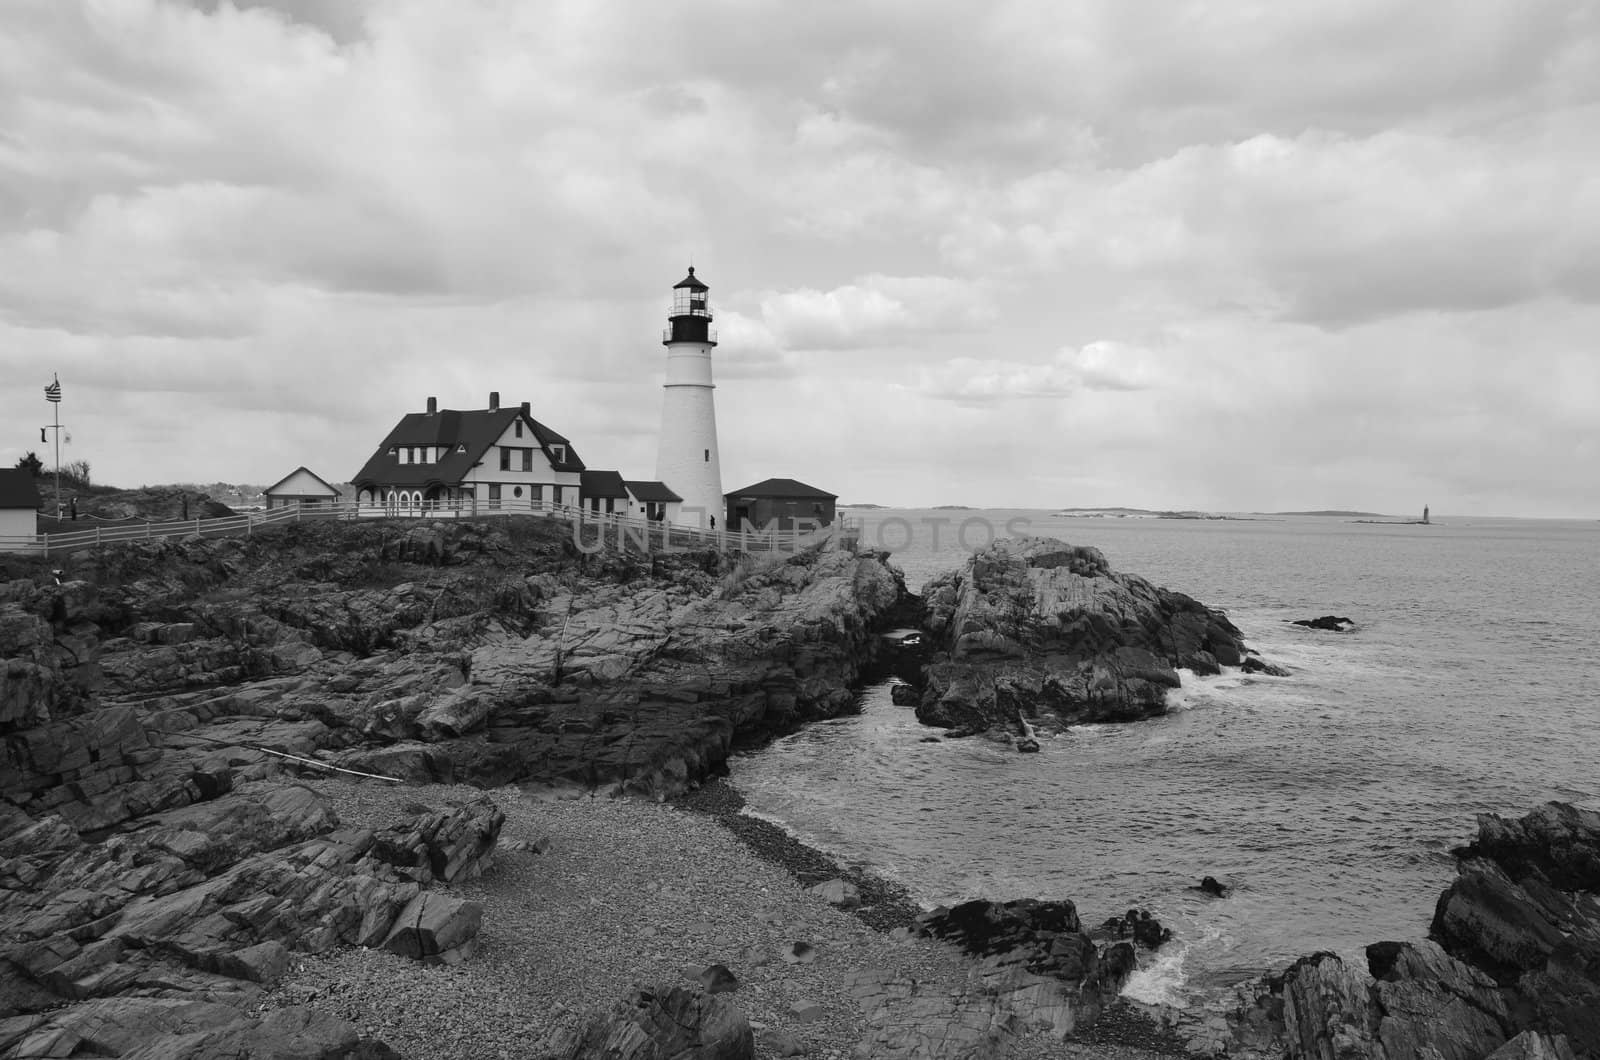 Famous portland head light off the coast of maine shown in black and white.